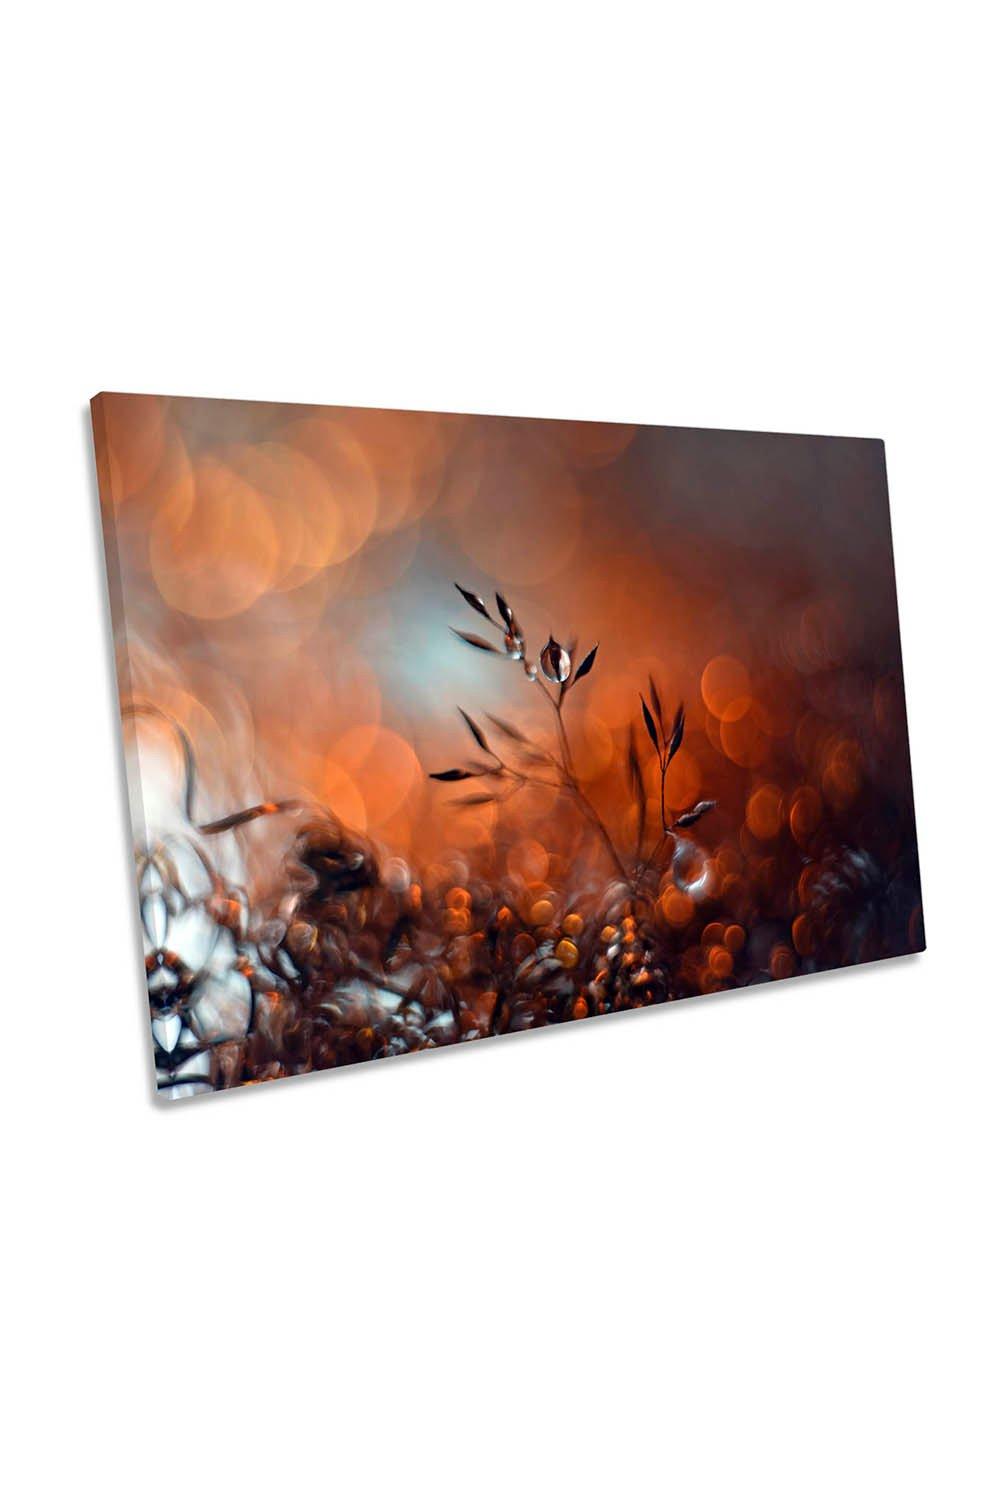 Bubbling of Happiness Water Drop Floral Canvas Wall Art Picture Print